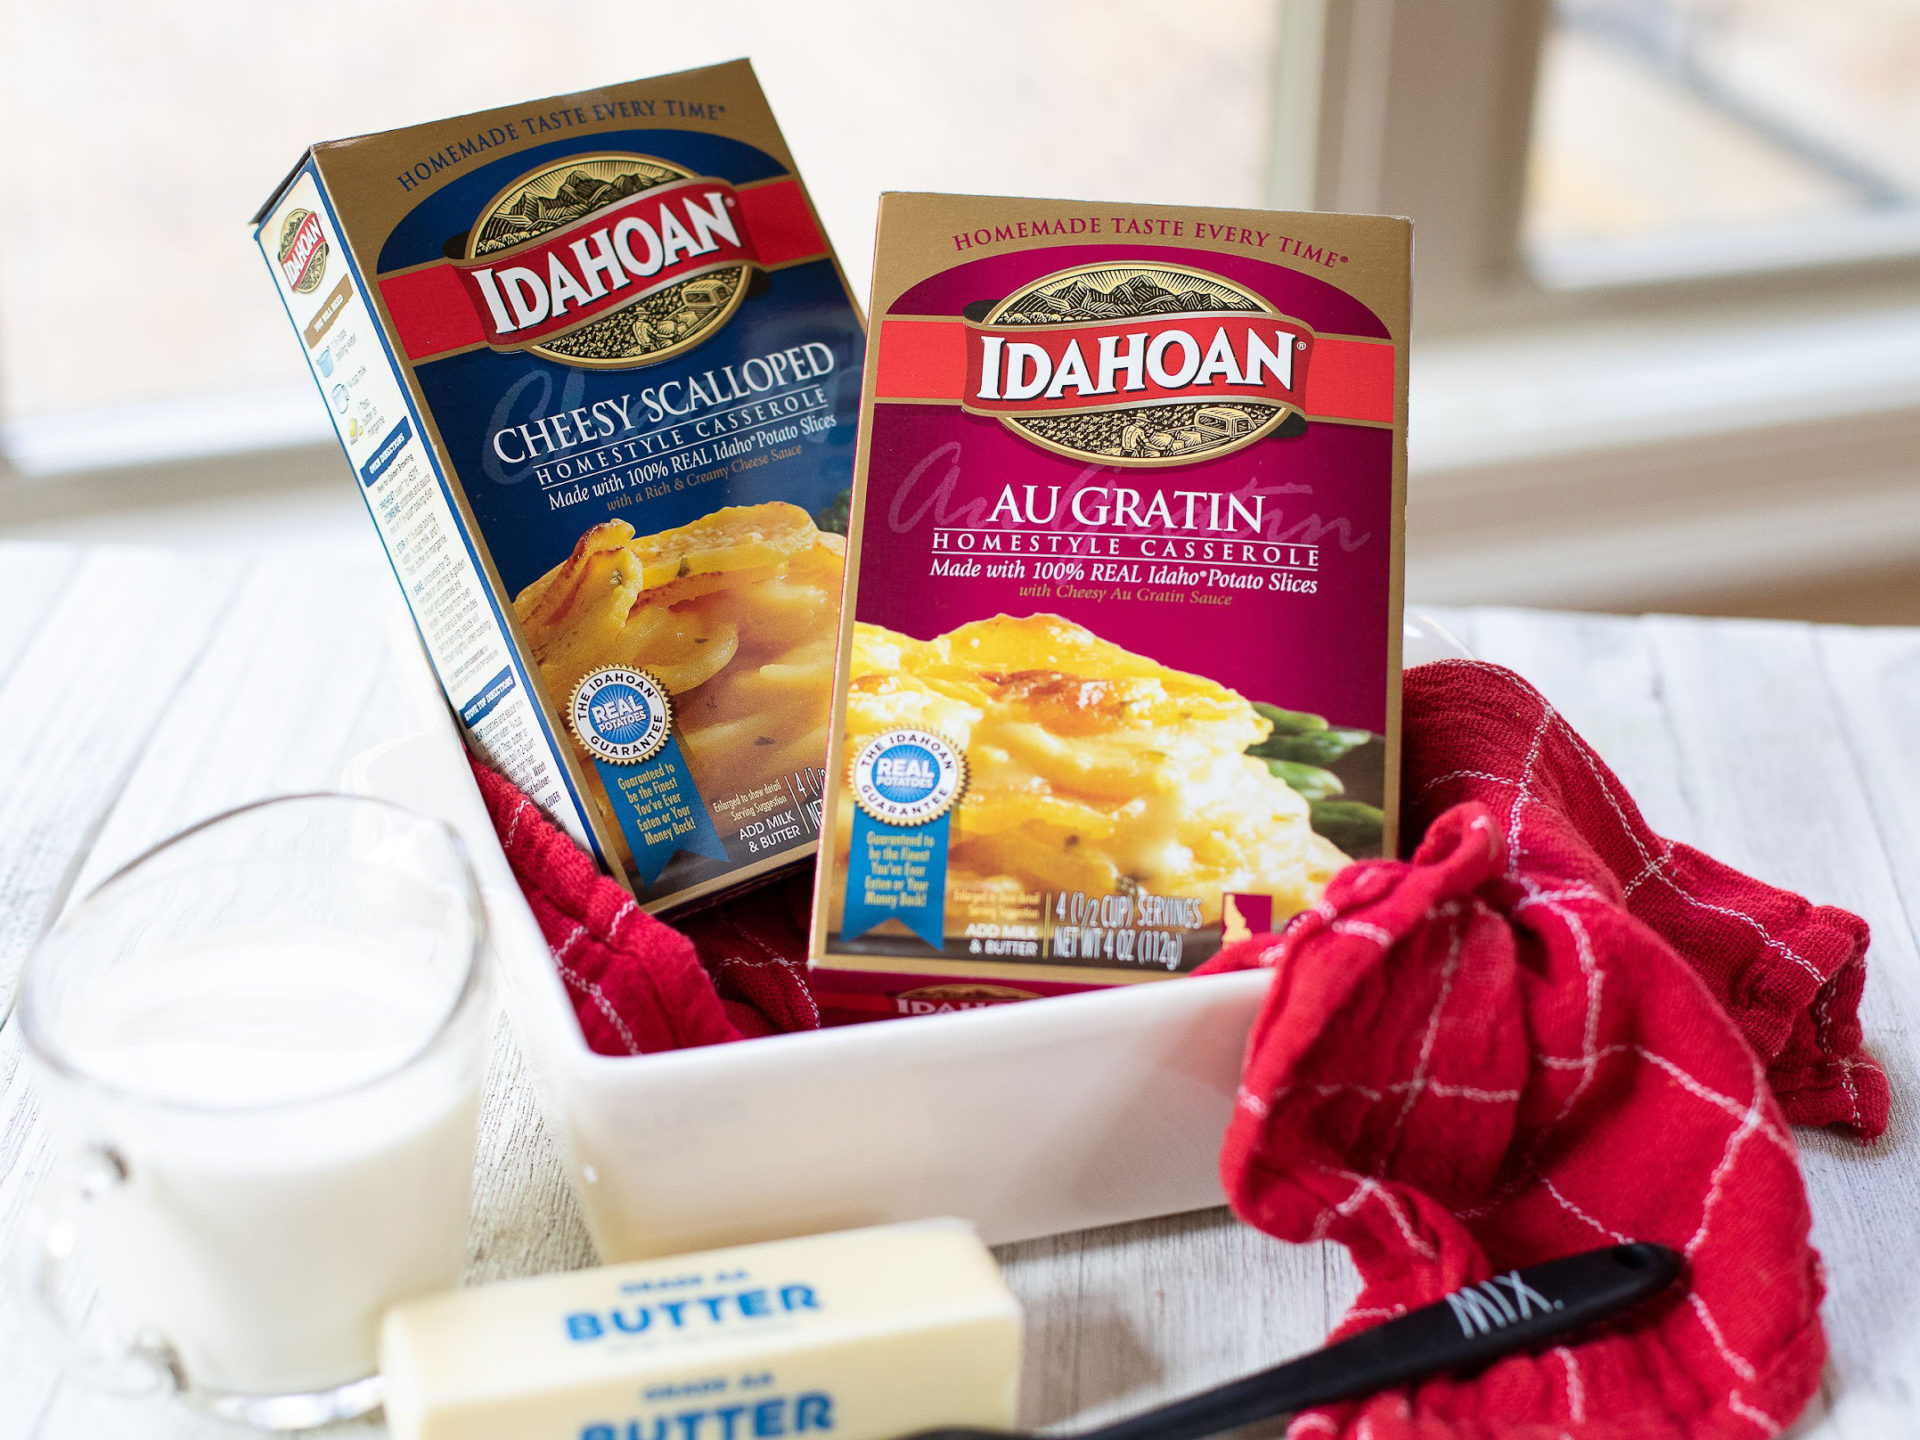 Pick Up Idahoan Mashed or Casserole Potatoes For Just 99¢ At Kroger